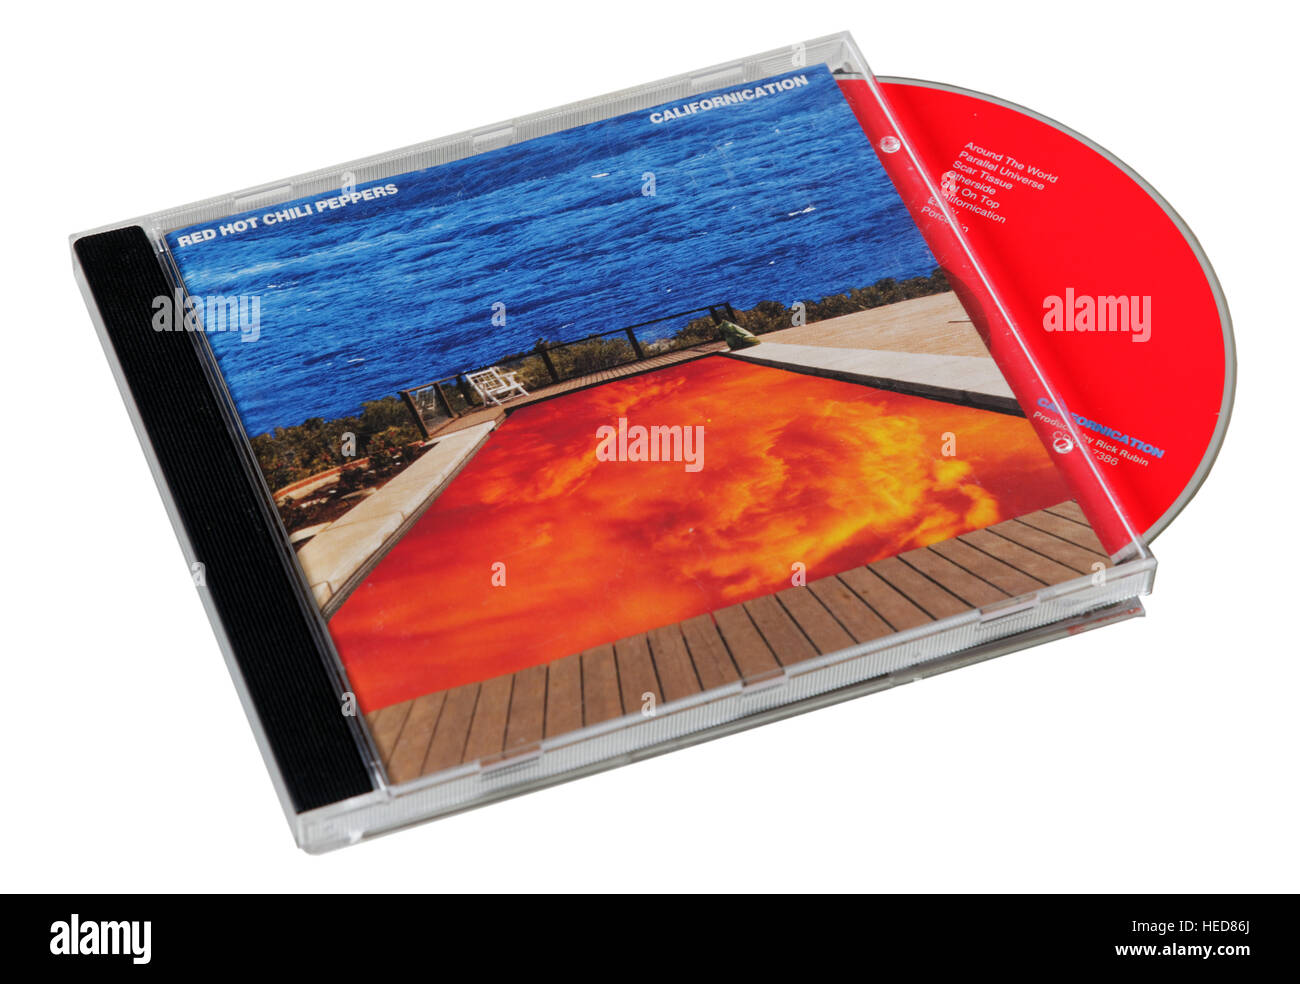 Red Hot Chilli Peppers Californication CD Stock Photo